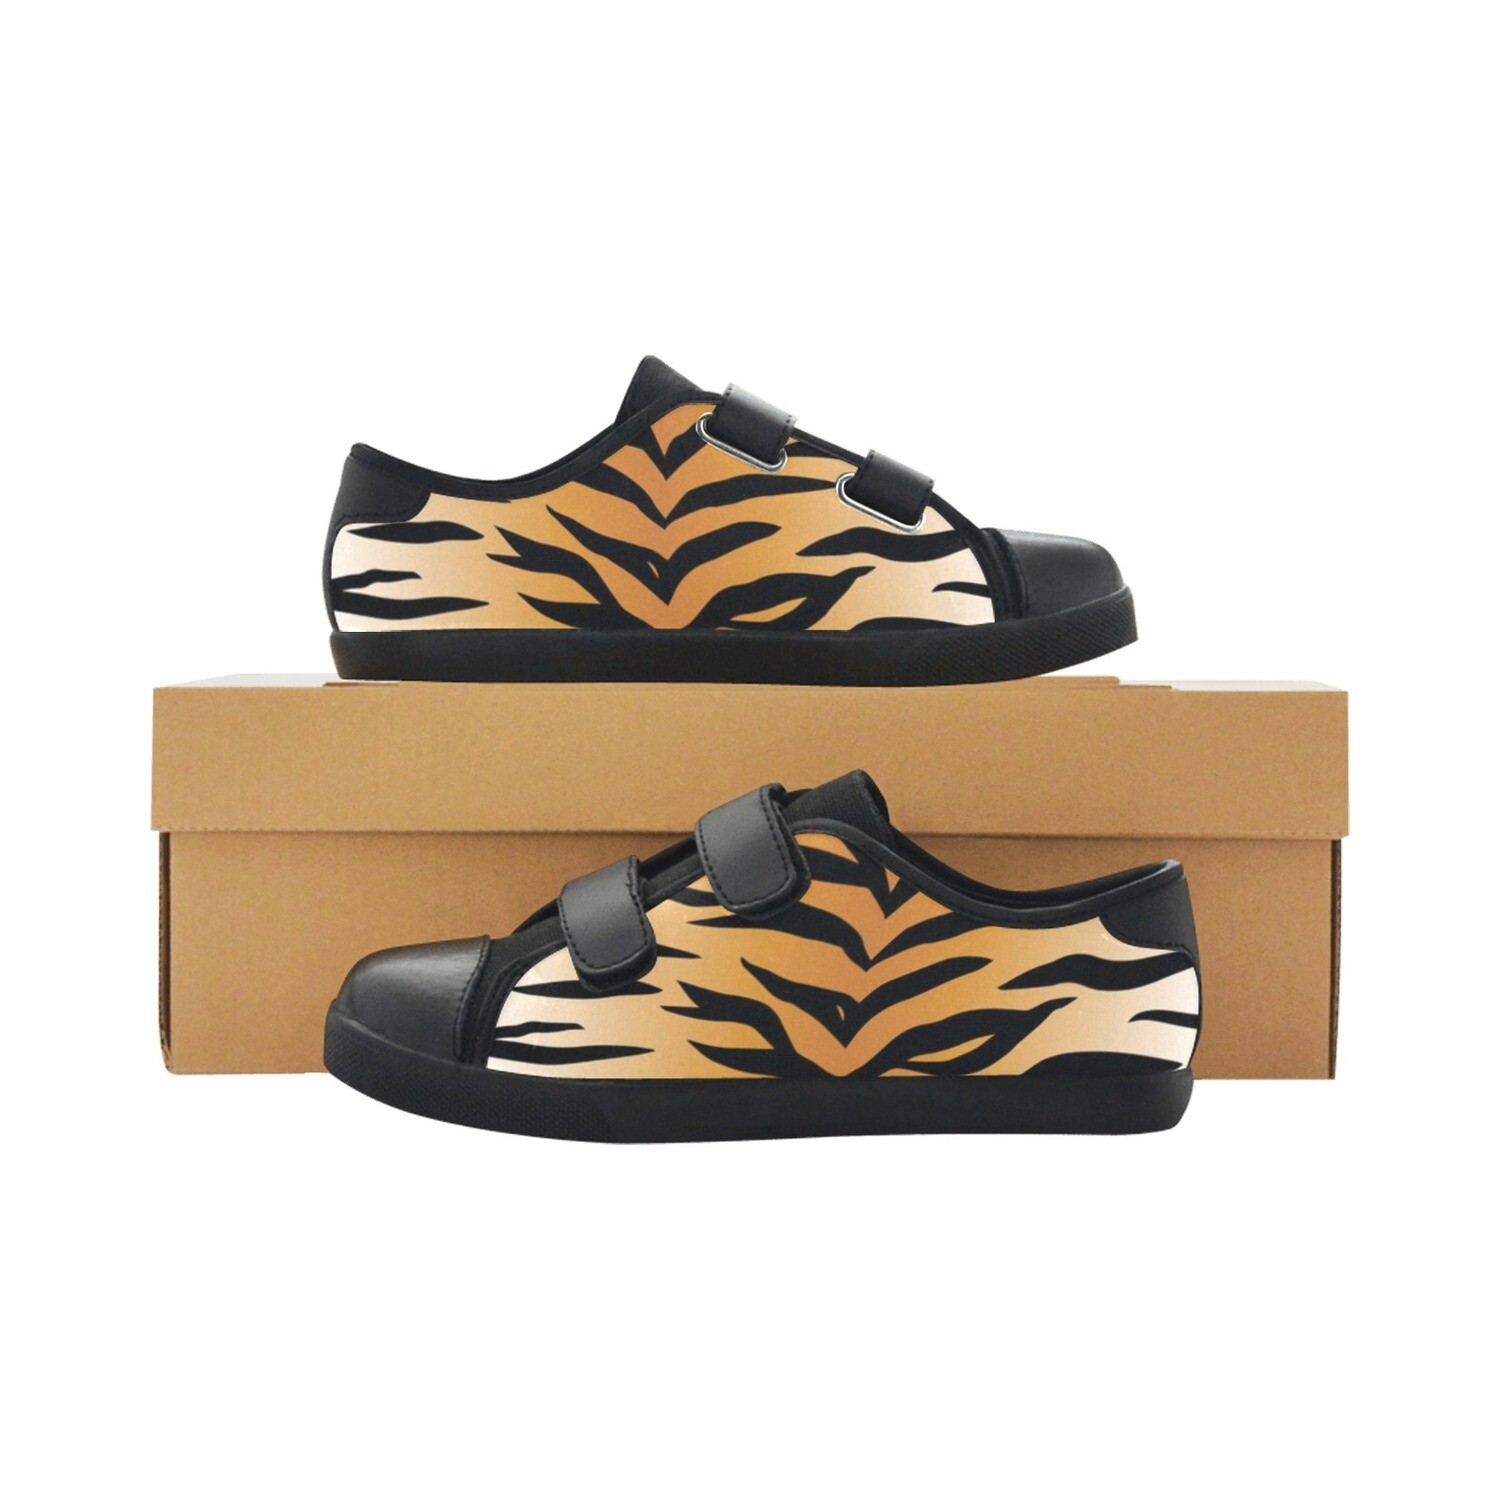 👸🏽🤴🏽👟🐅 Velcro Canvas Kid's Shoes, Classic Tiger print, Feline print, Animal's print, Gift for kids, any color, 5 sizes